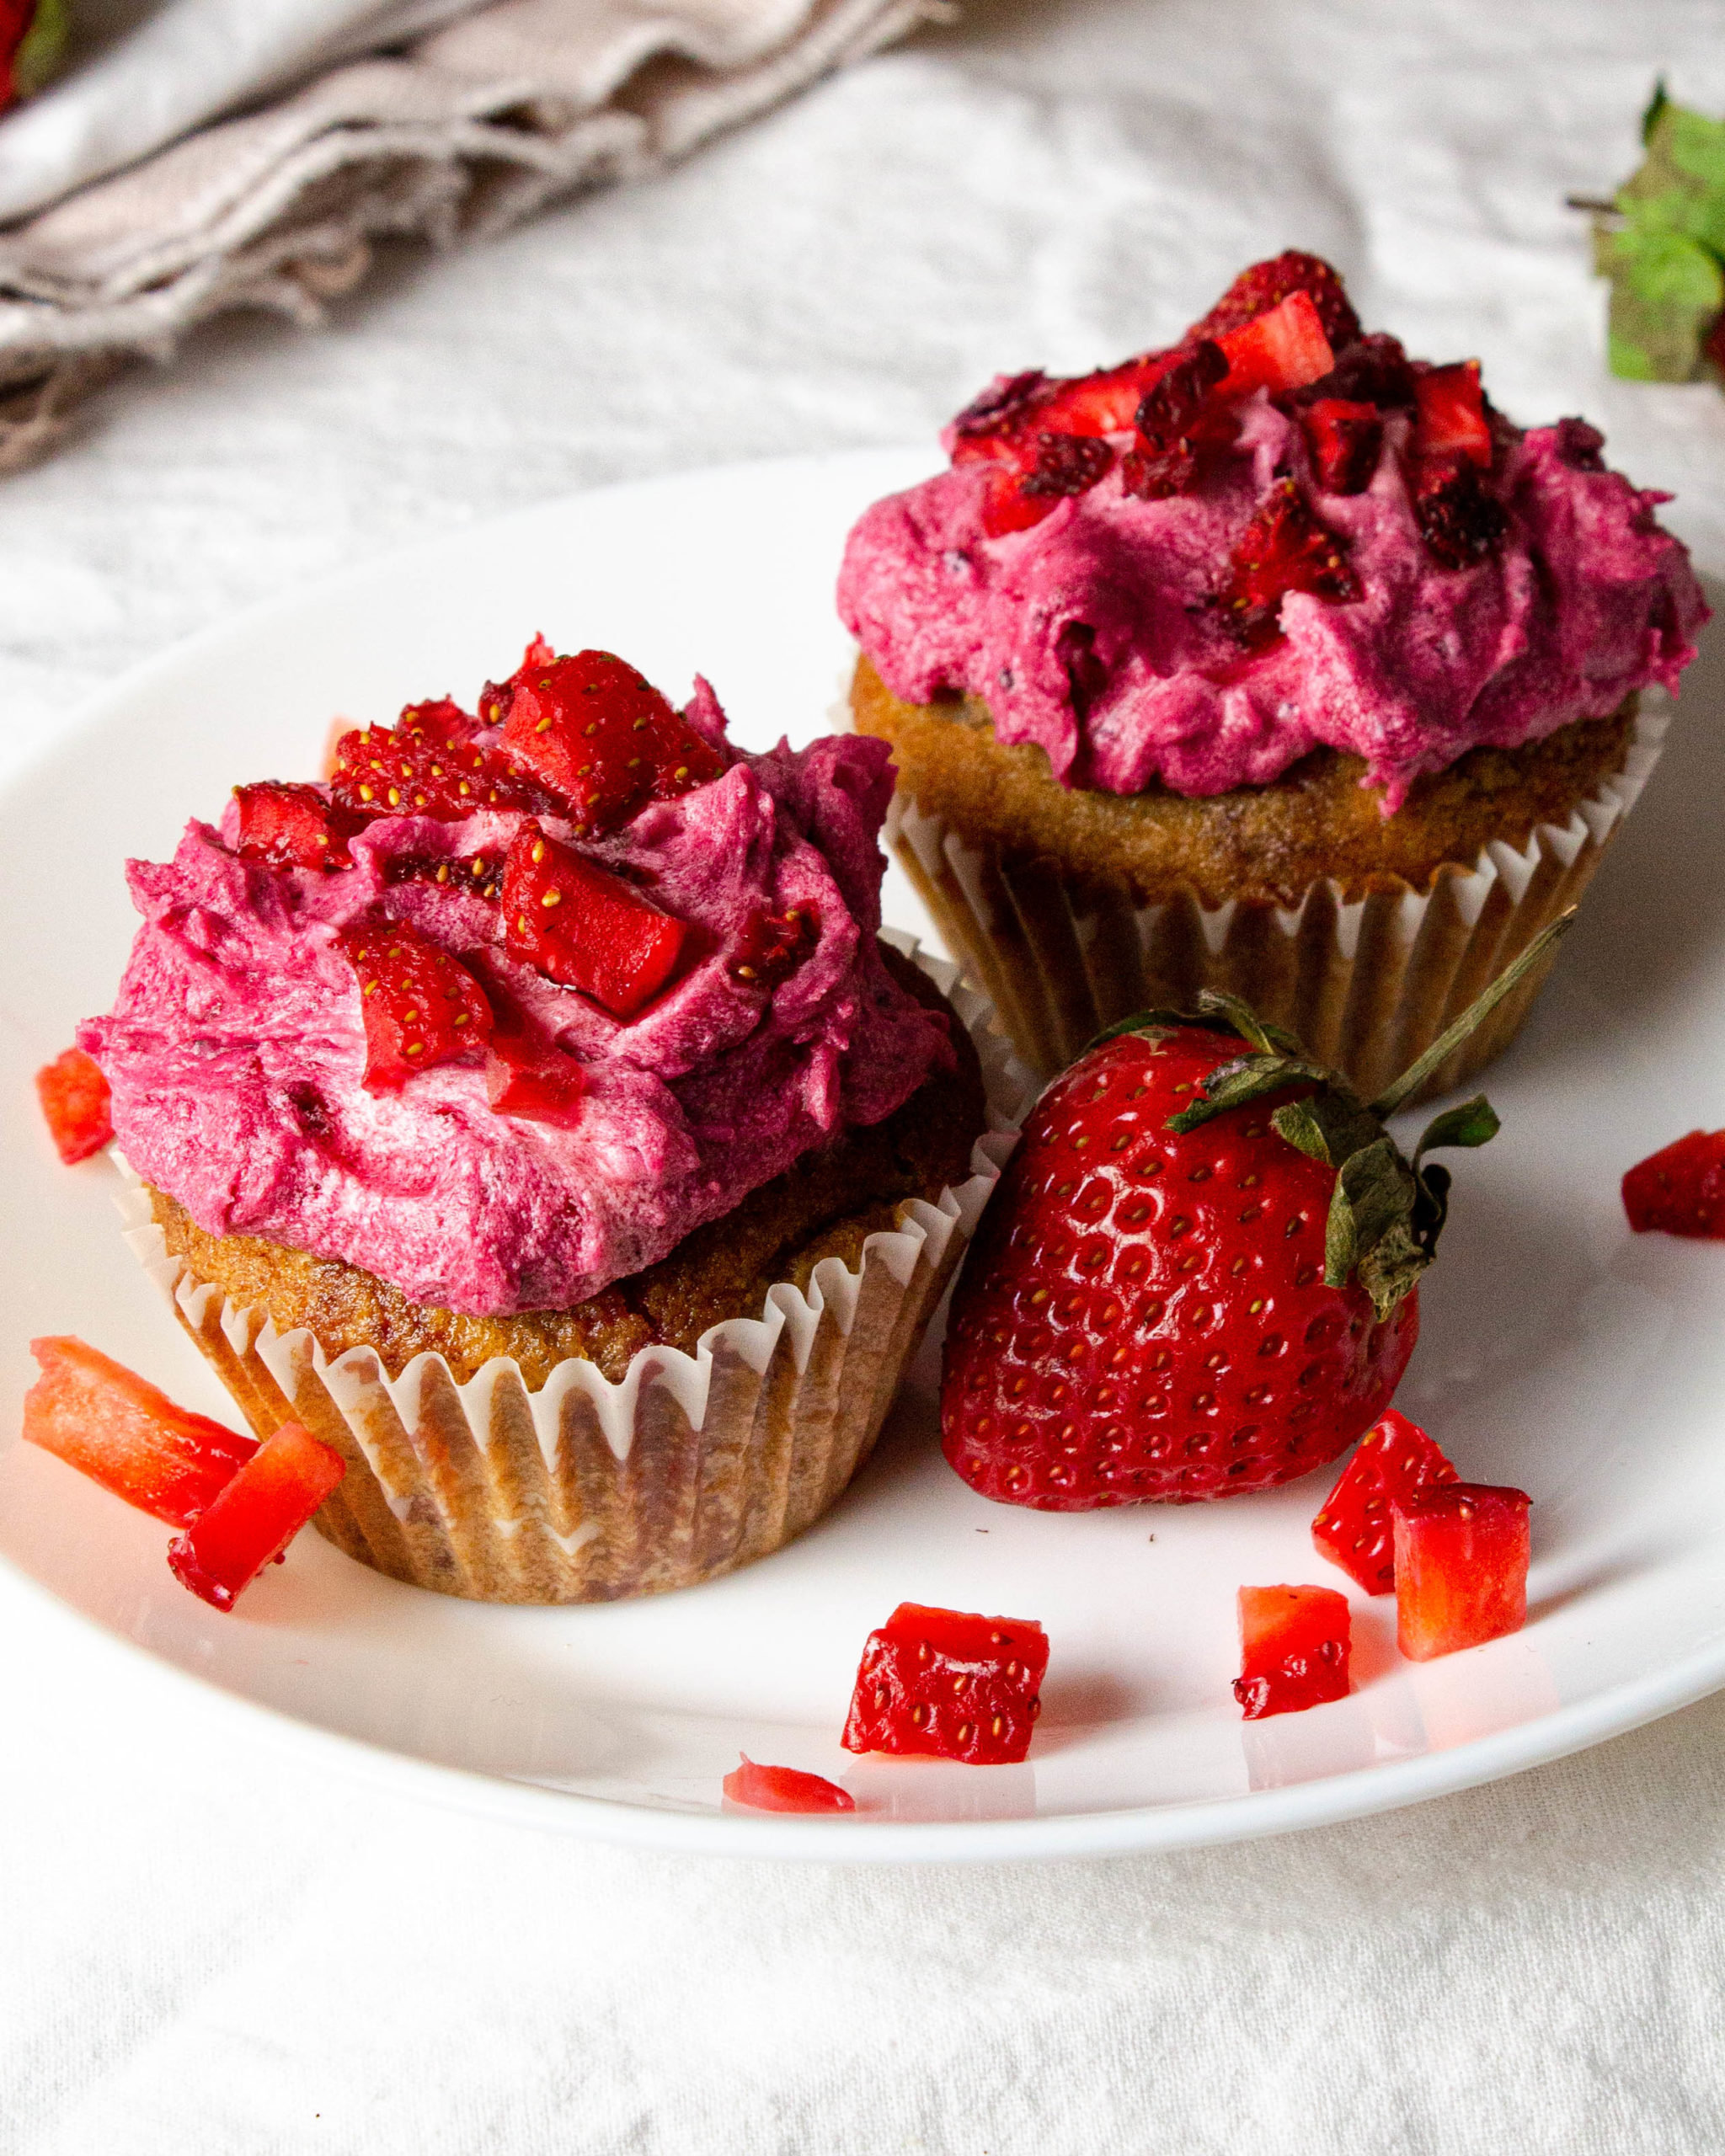 Recipe for Strawberry Cupcakes
